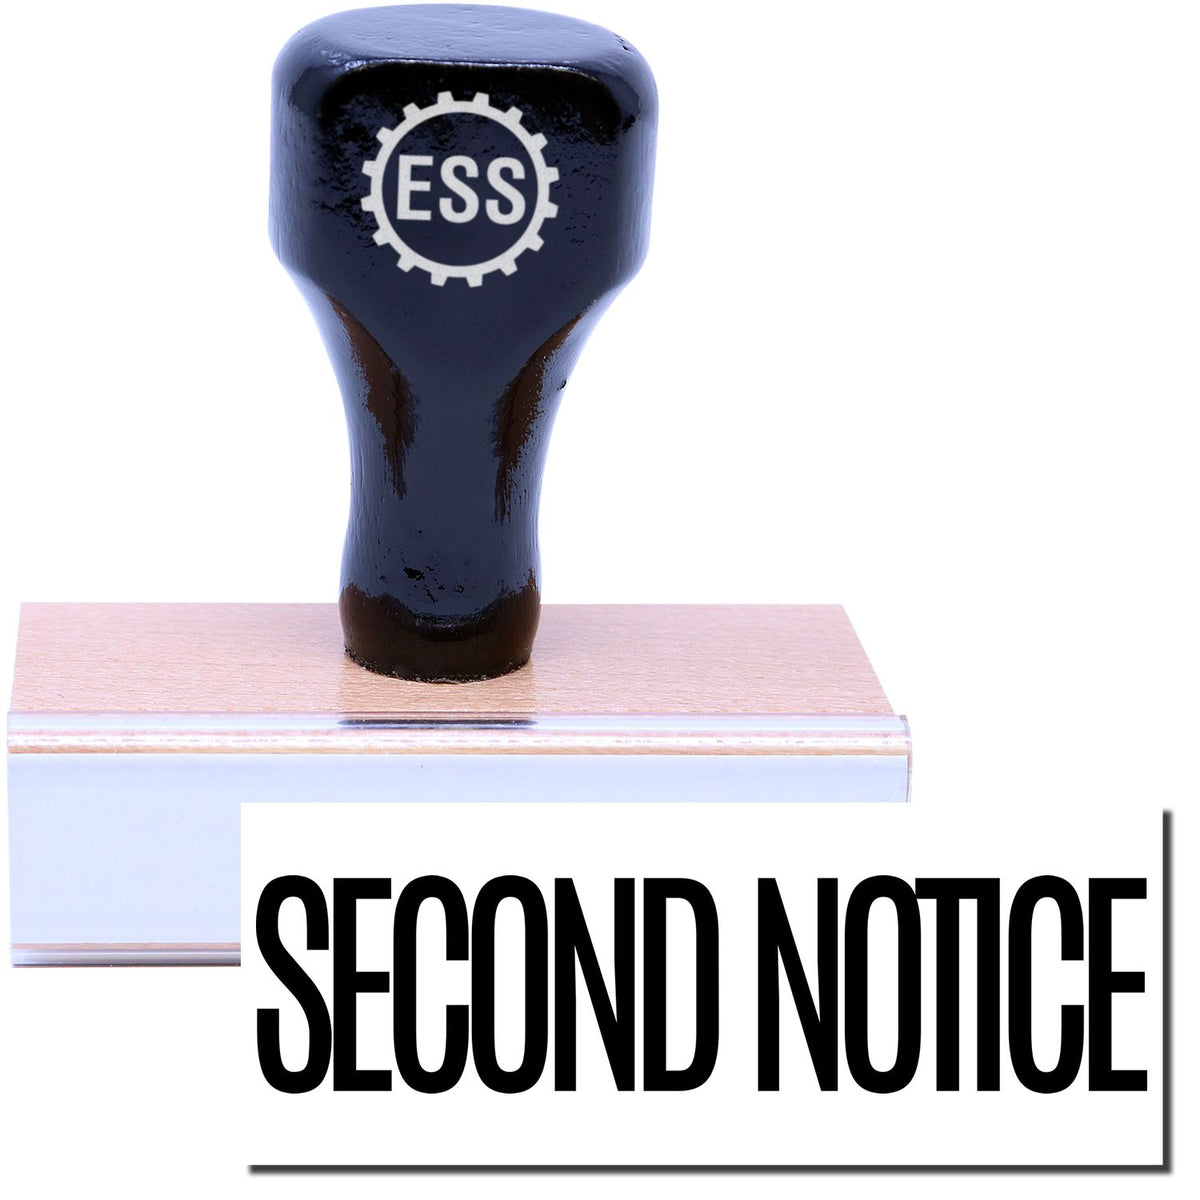 A stock office rubber stamp with a stamped image showing how the text &quot;SECOND NOTICE&quot; in a narrow font is displayed after stamping.